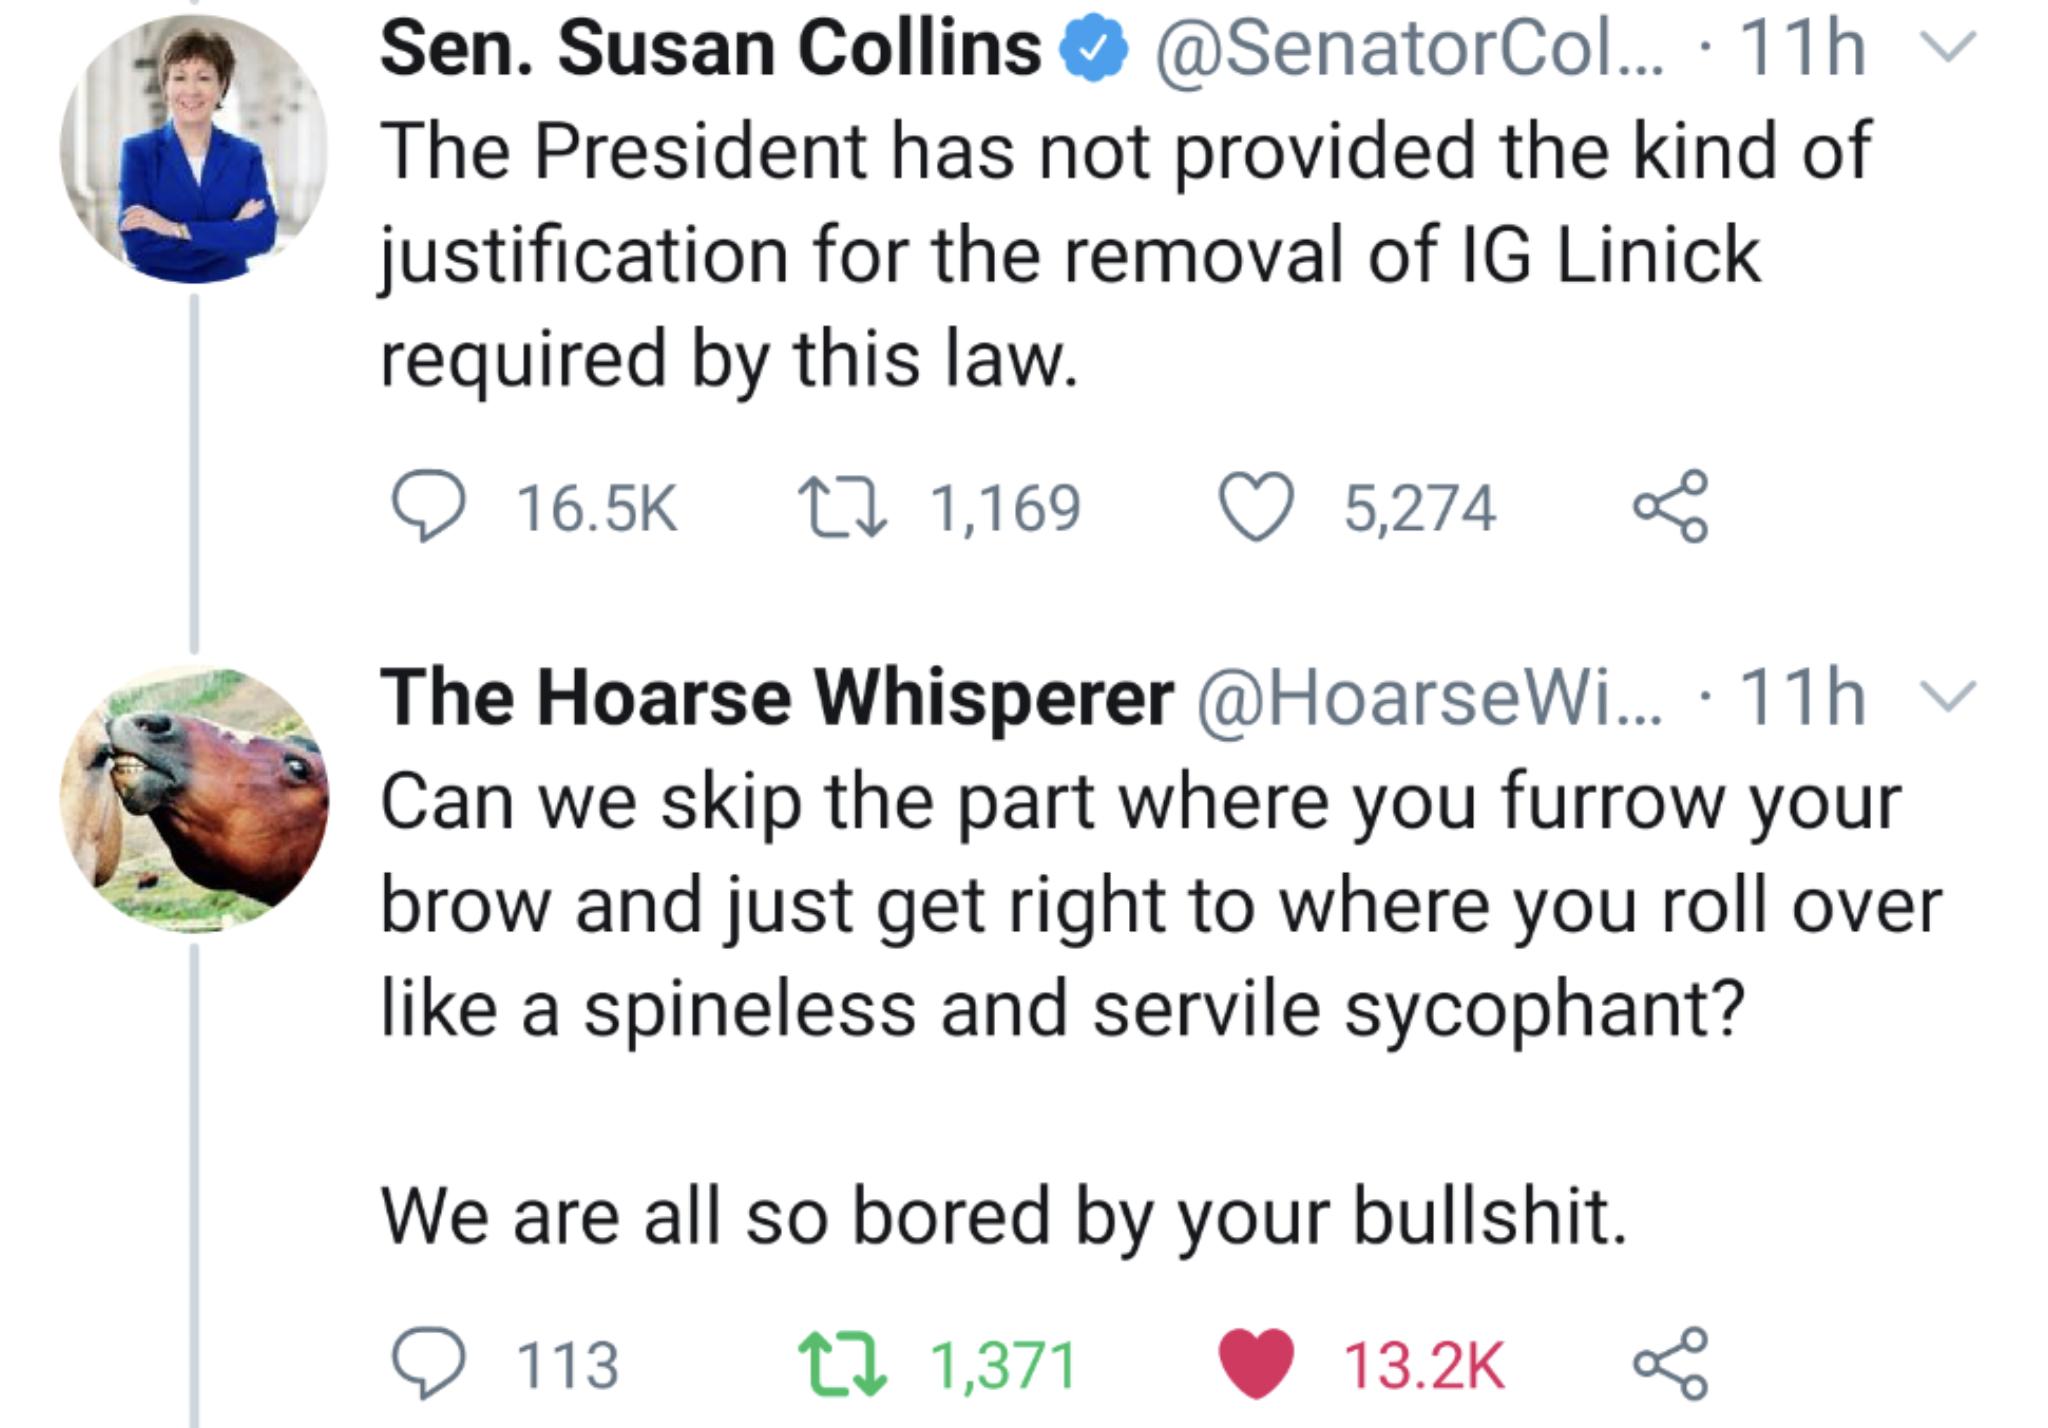 Political, President, Susan, November, Collins, Susan Collins Political Memes Political, President, Susan, November, Collins, Susan Collins text: Sen. Susan Collins @ @SenatorCol... • 11 h The President has not provided the kind of justification for the removal of IG Linick required by this law. 0 16.5K t_-0 1,169 0 5,274 < The Hoarse Whisperer @HoarseWi... • 11 h Can we skip the part where you furrow your brow and just get right to where you roll over like a spineless and servile sycophant? We are all so bored by your bullshit. 0 113 0 13.2K < t-J 1,371 